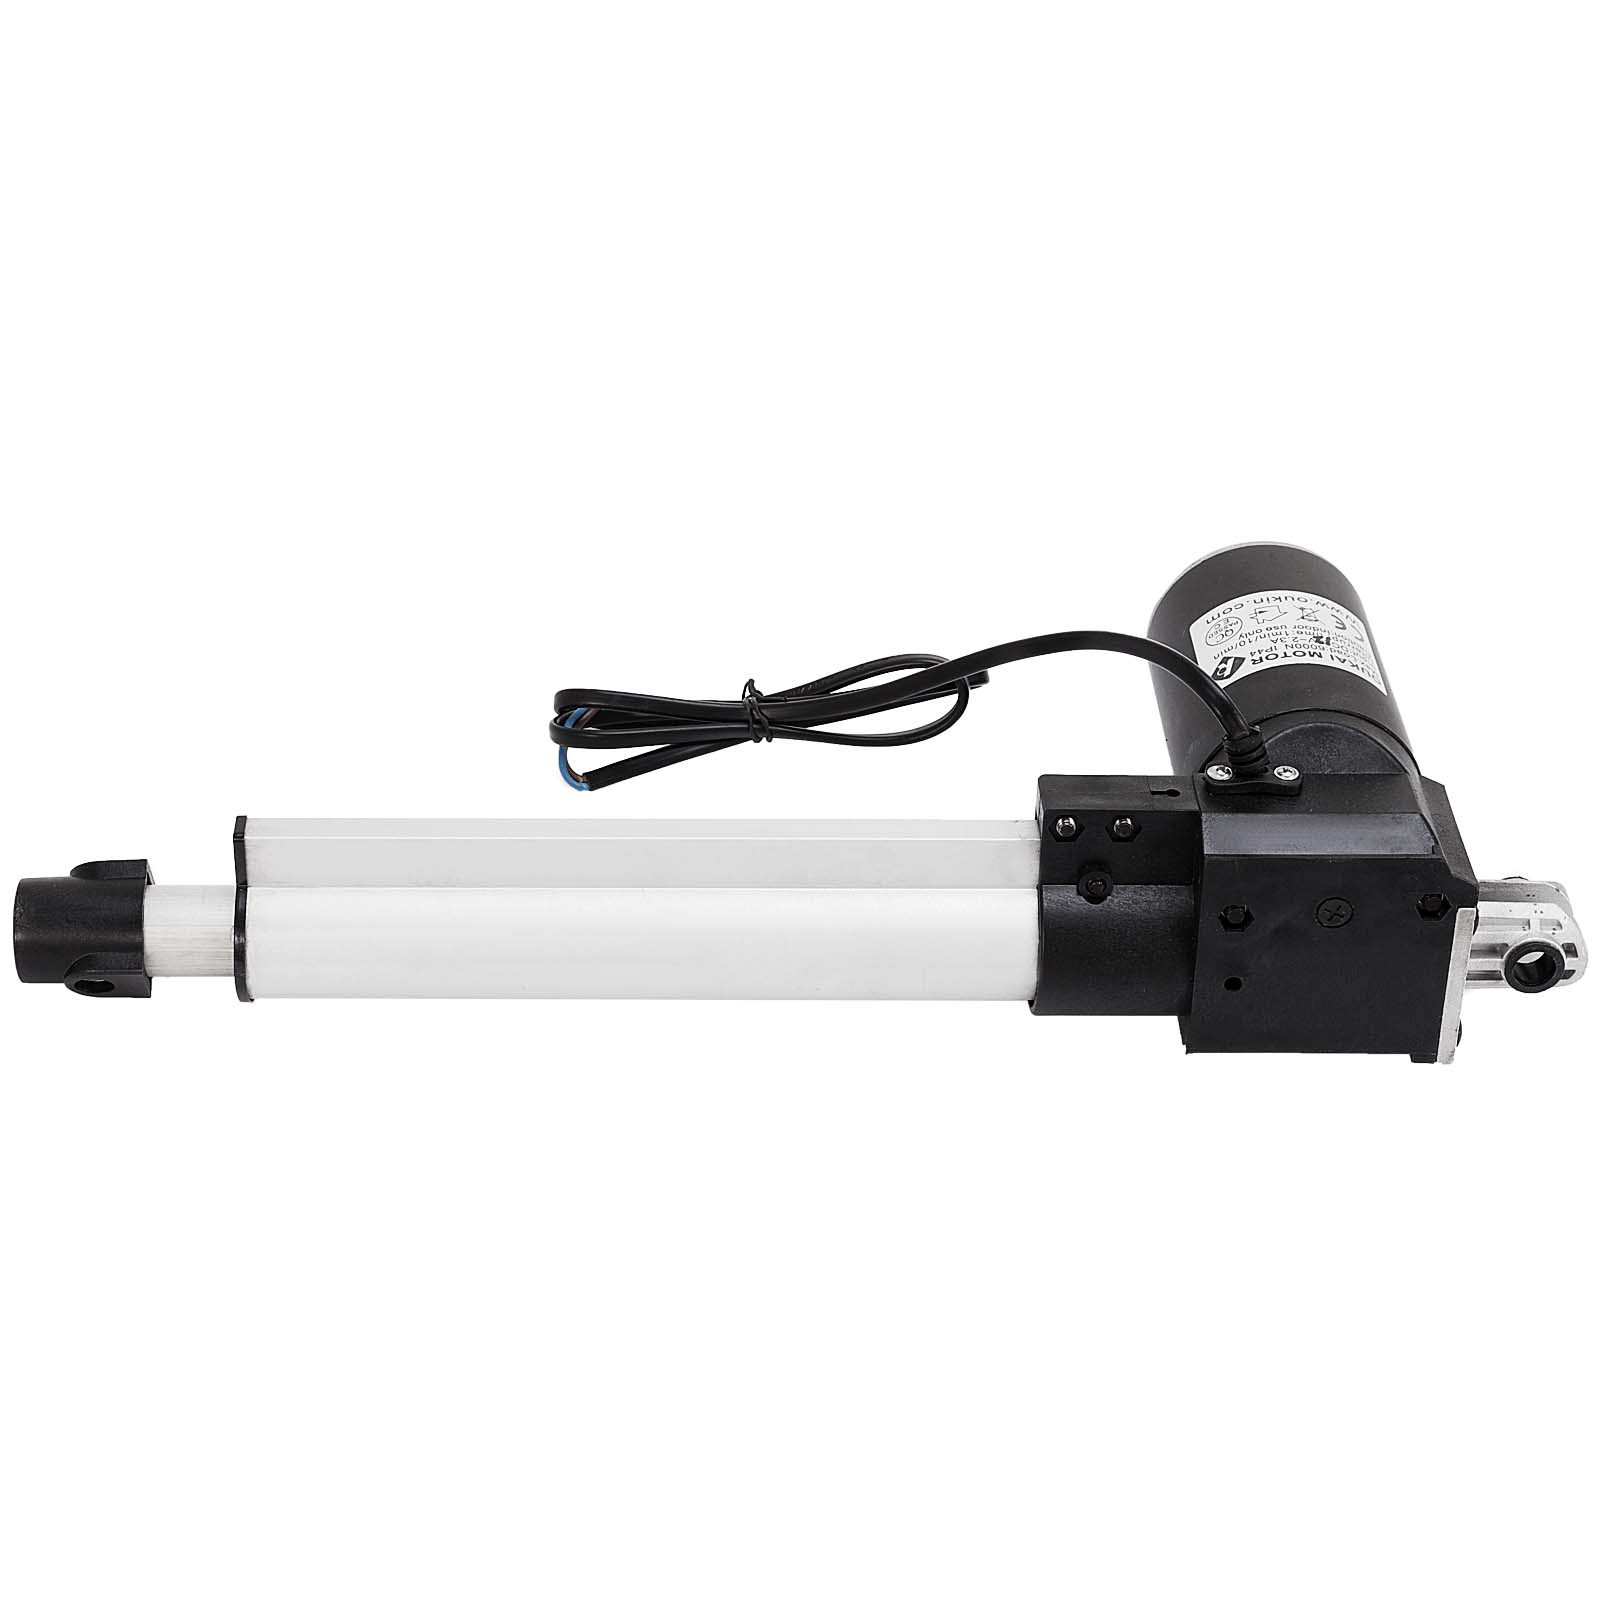 12" Stroke Linear Actuator 1320LBS Cylinder Lift Electric DC Motor Stroke 